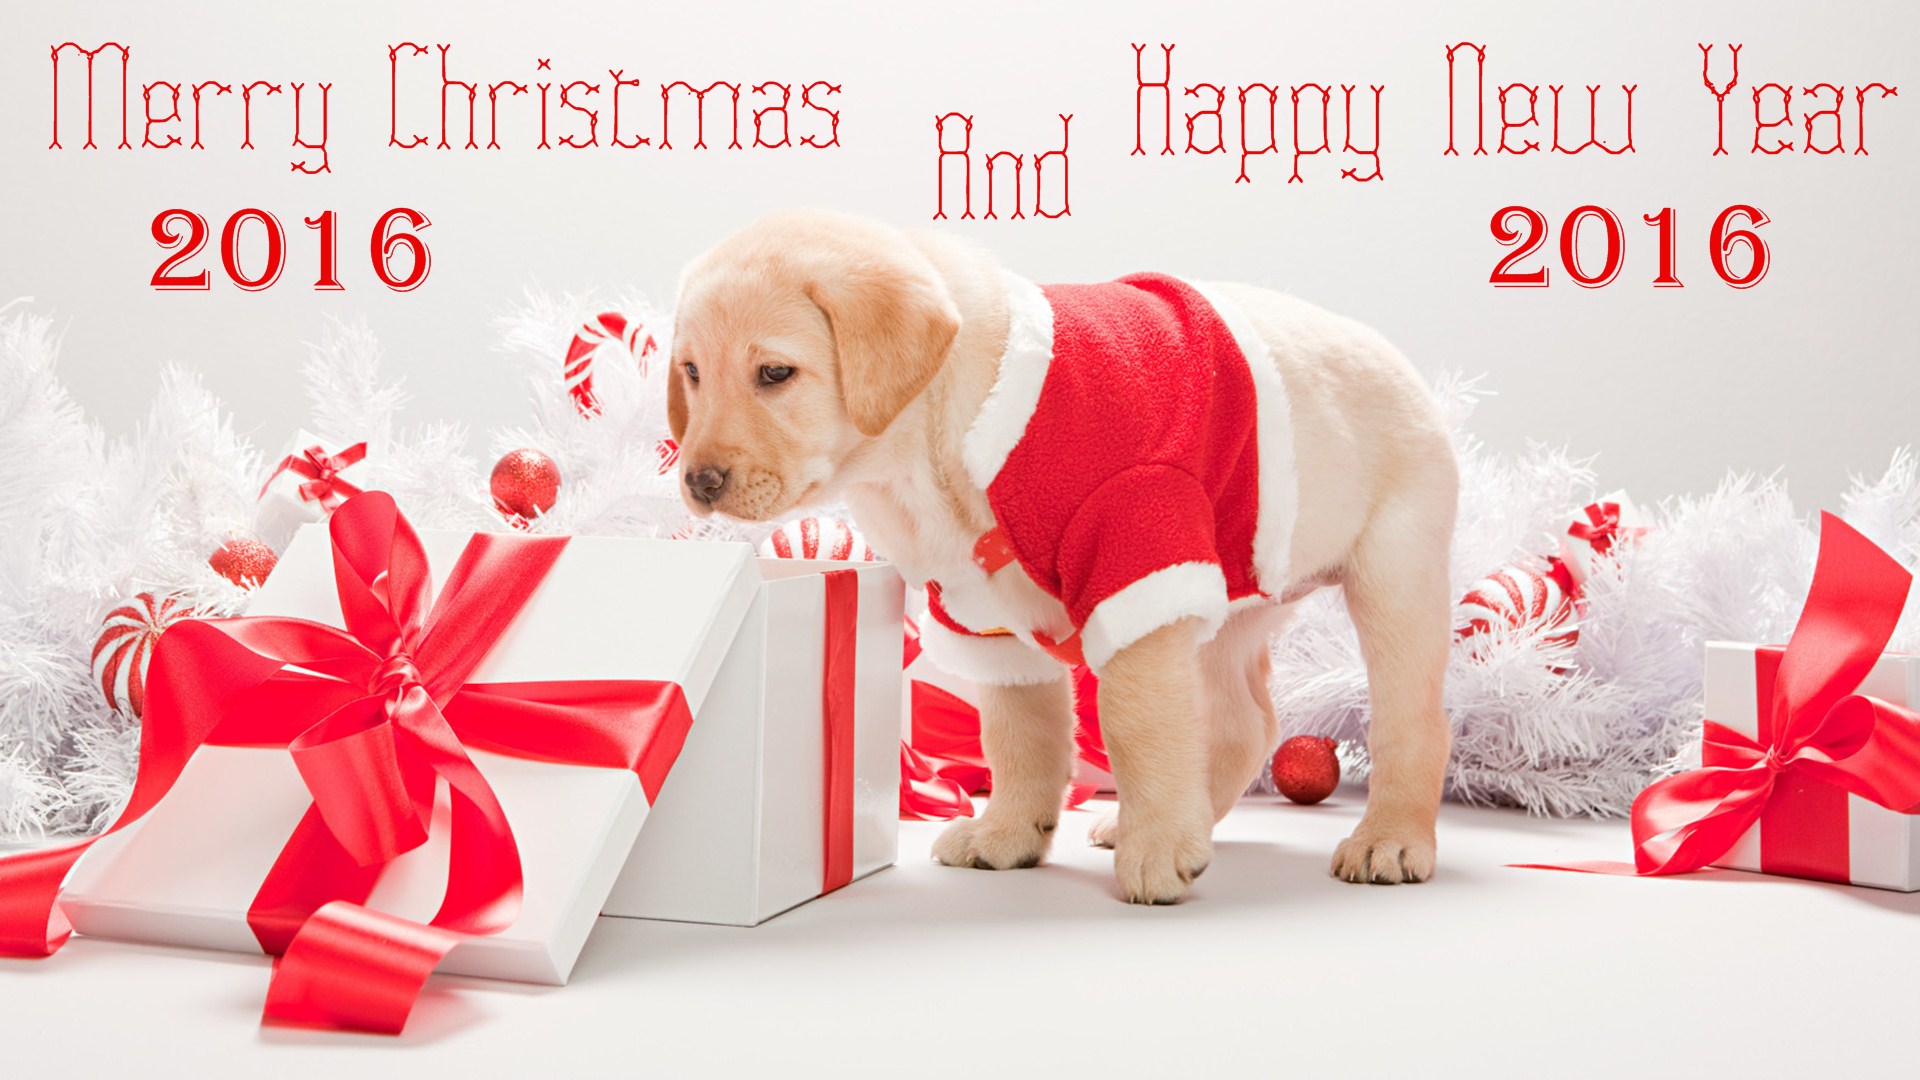 Merry Christmas And Happy New Year 2016 Labrador Puppy Looking Gifts